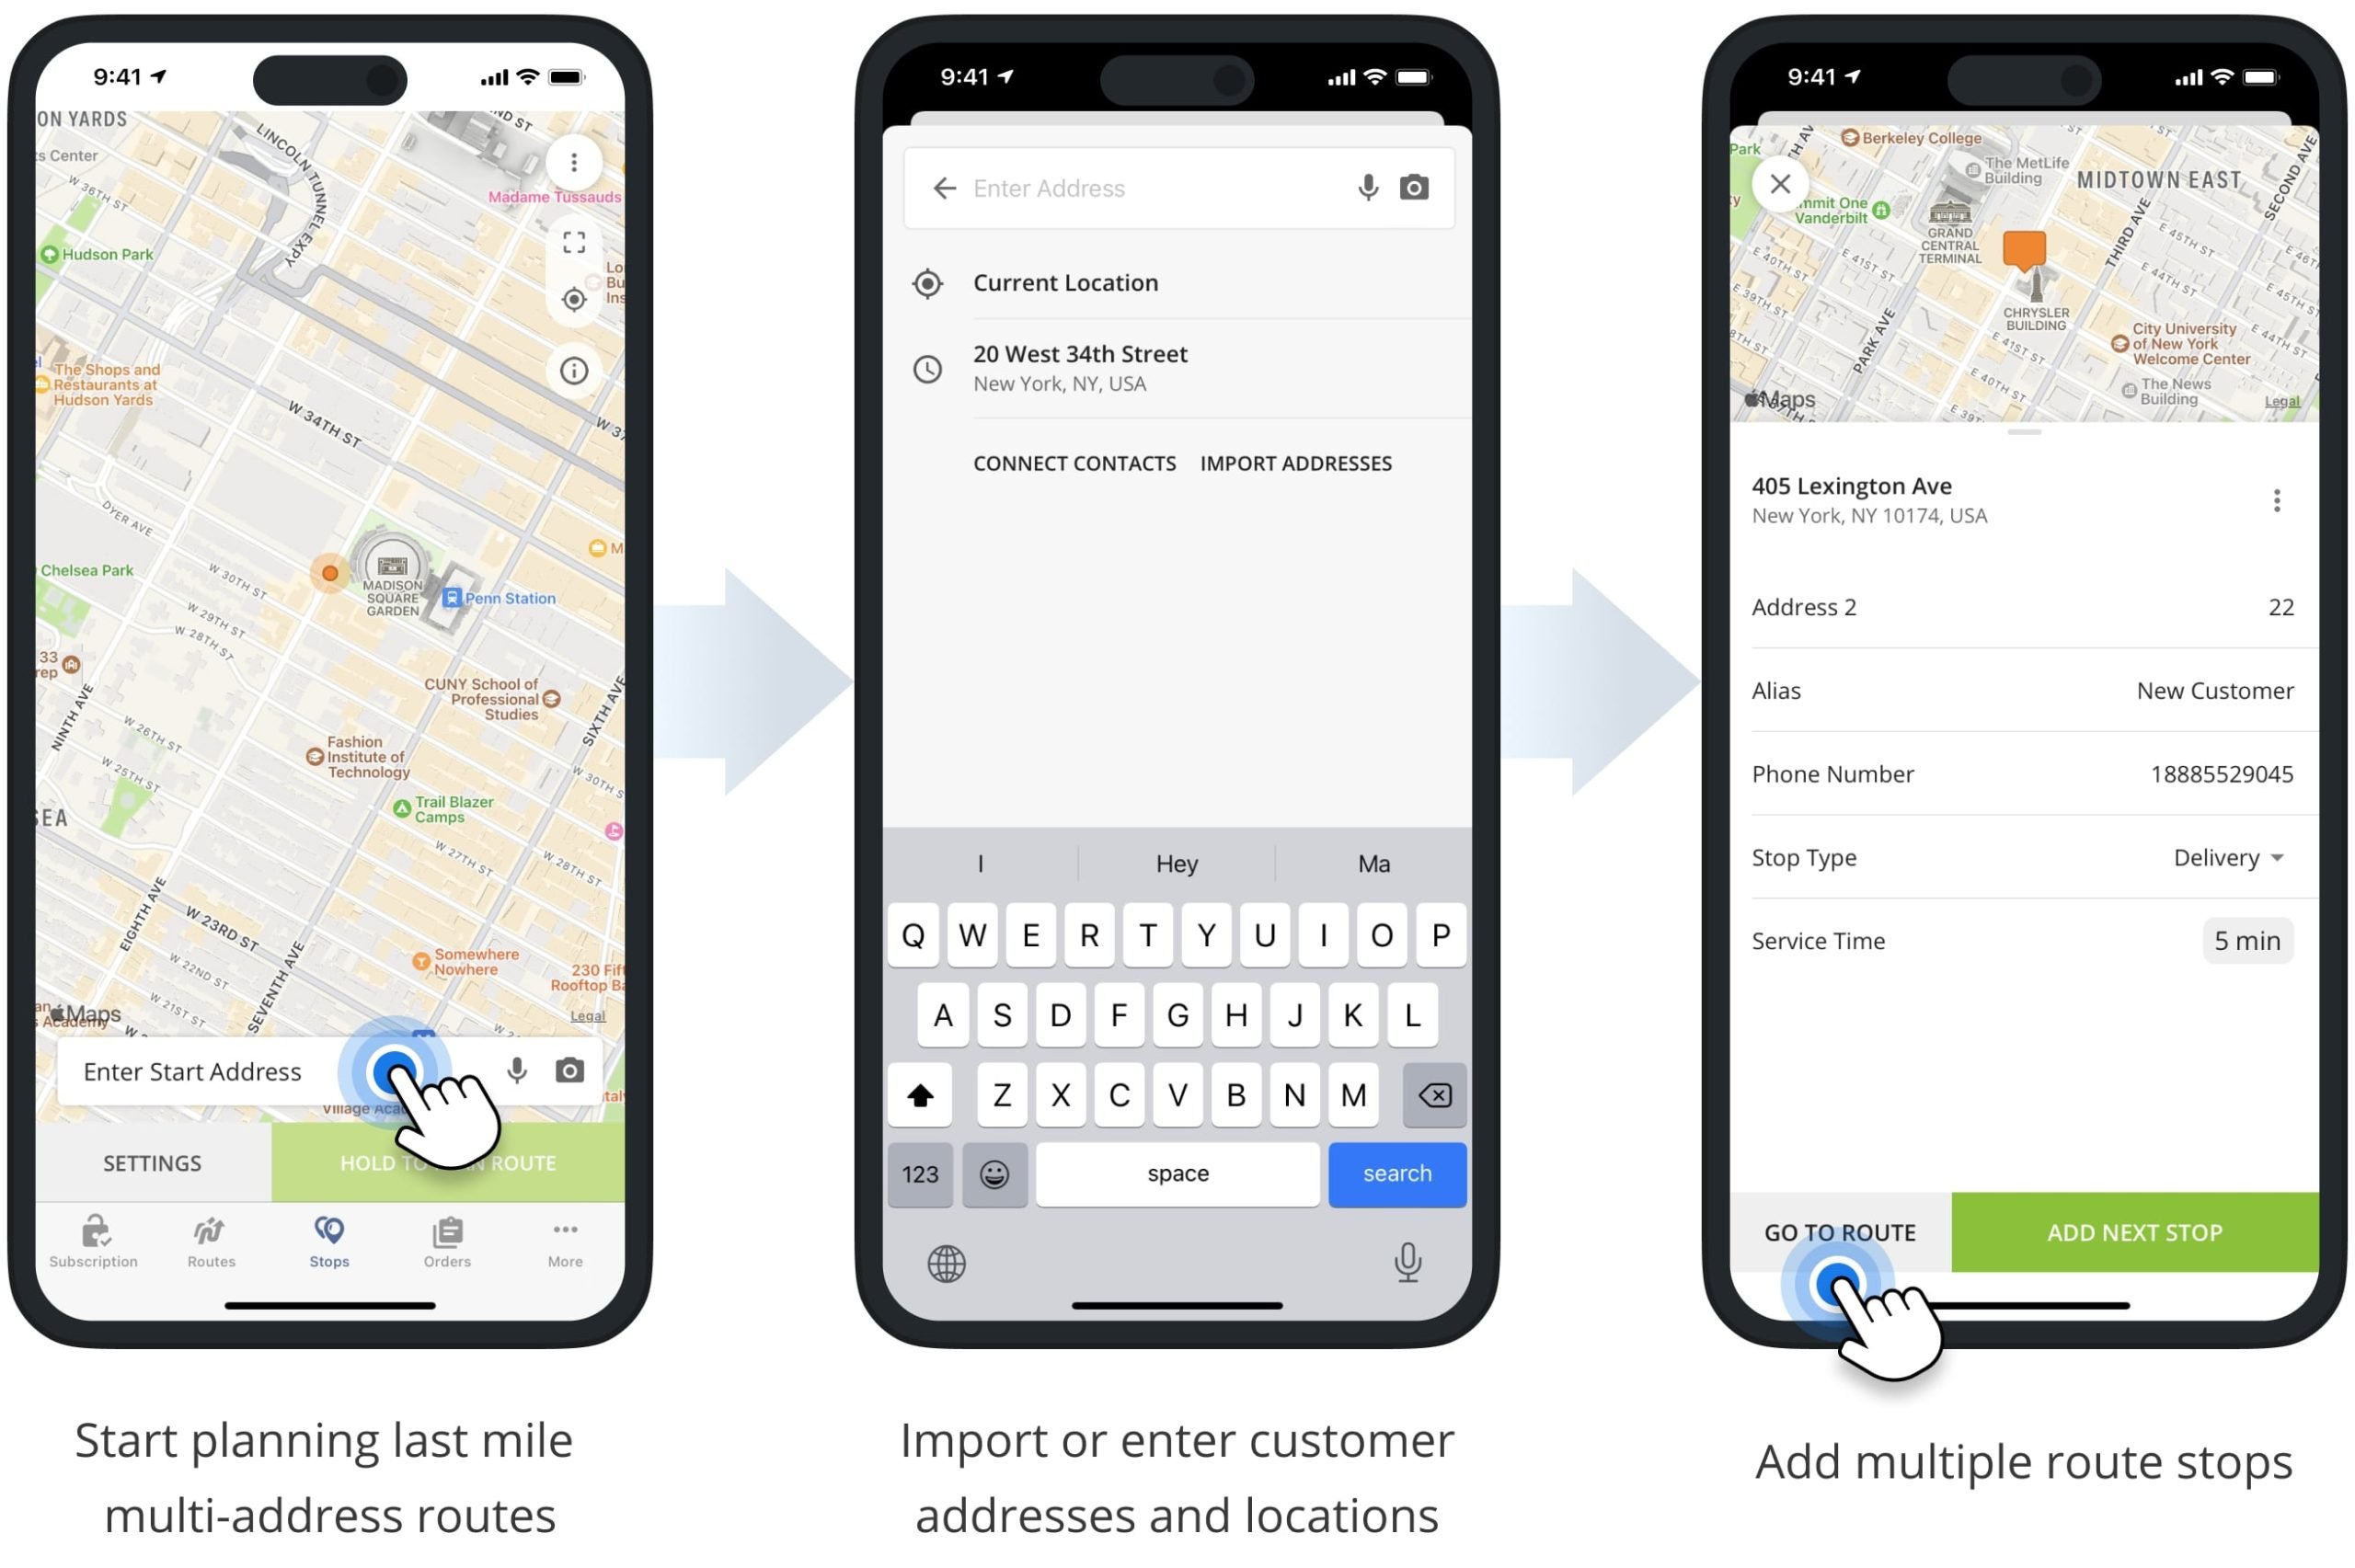 Add customer addresses to plan multi-address routes on the iPhone route planner app.